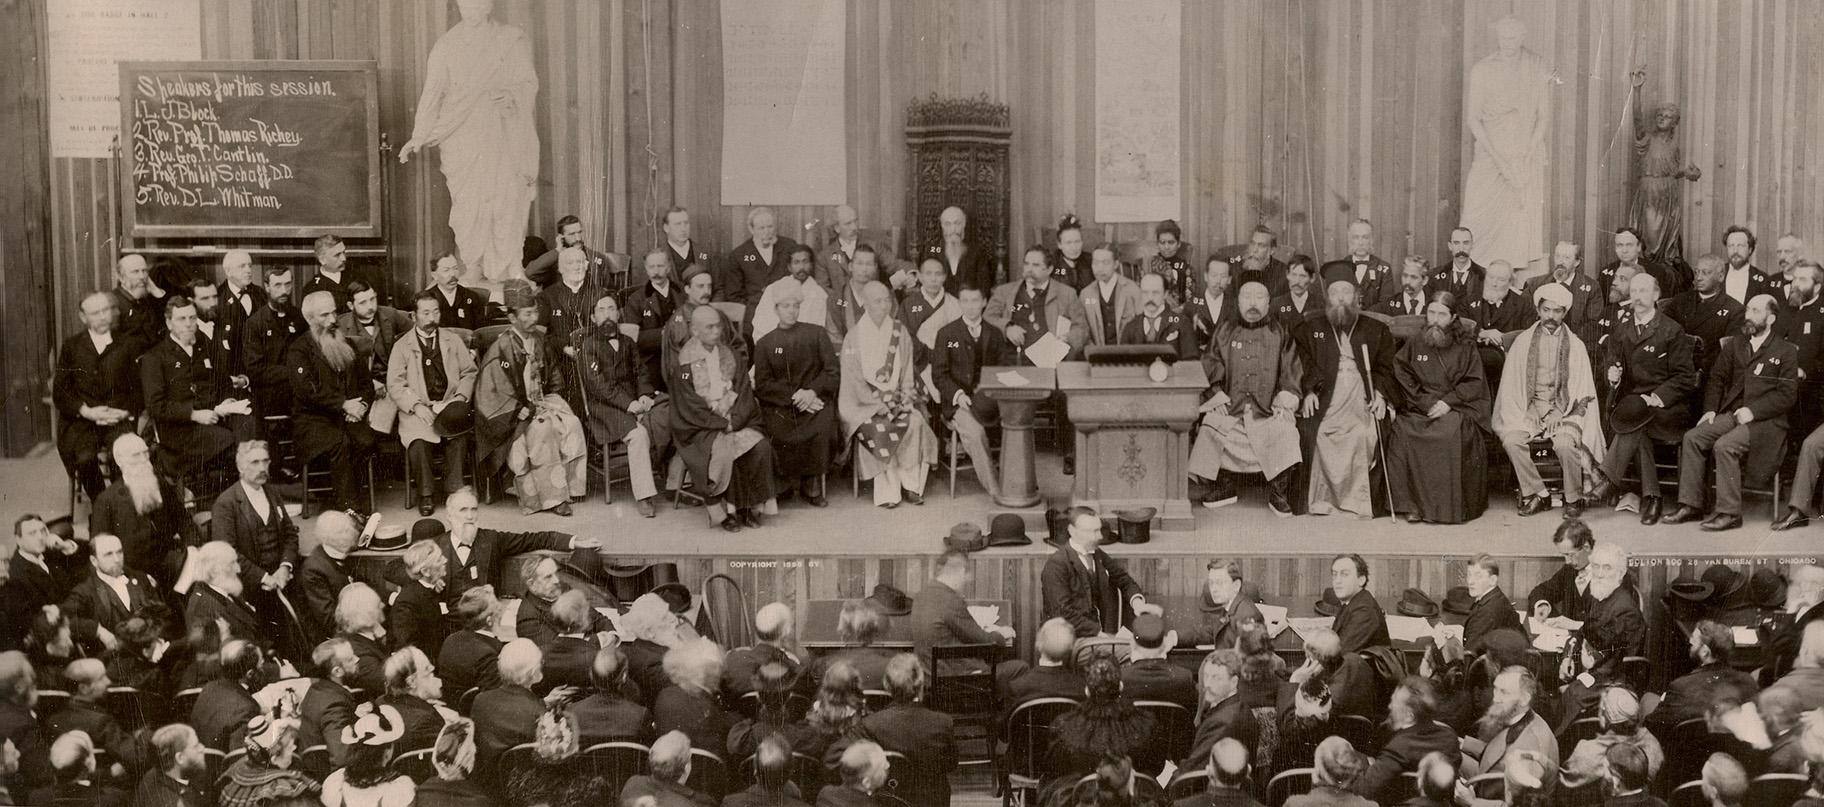 This photo provided by the Parliament of the World's Religions shows the organization's inaugural event in Chicago in 1893. (Parliament of the World’s Religions via AP)